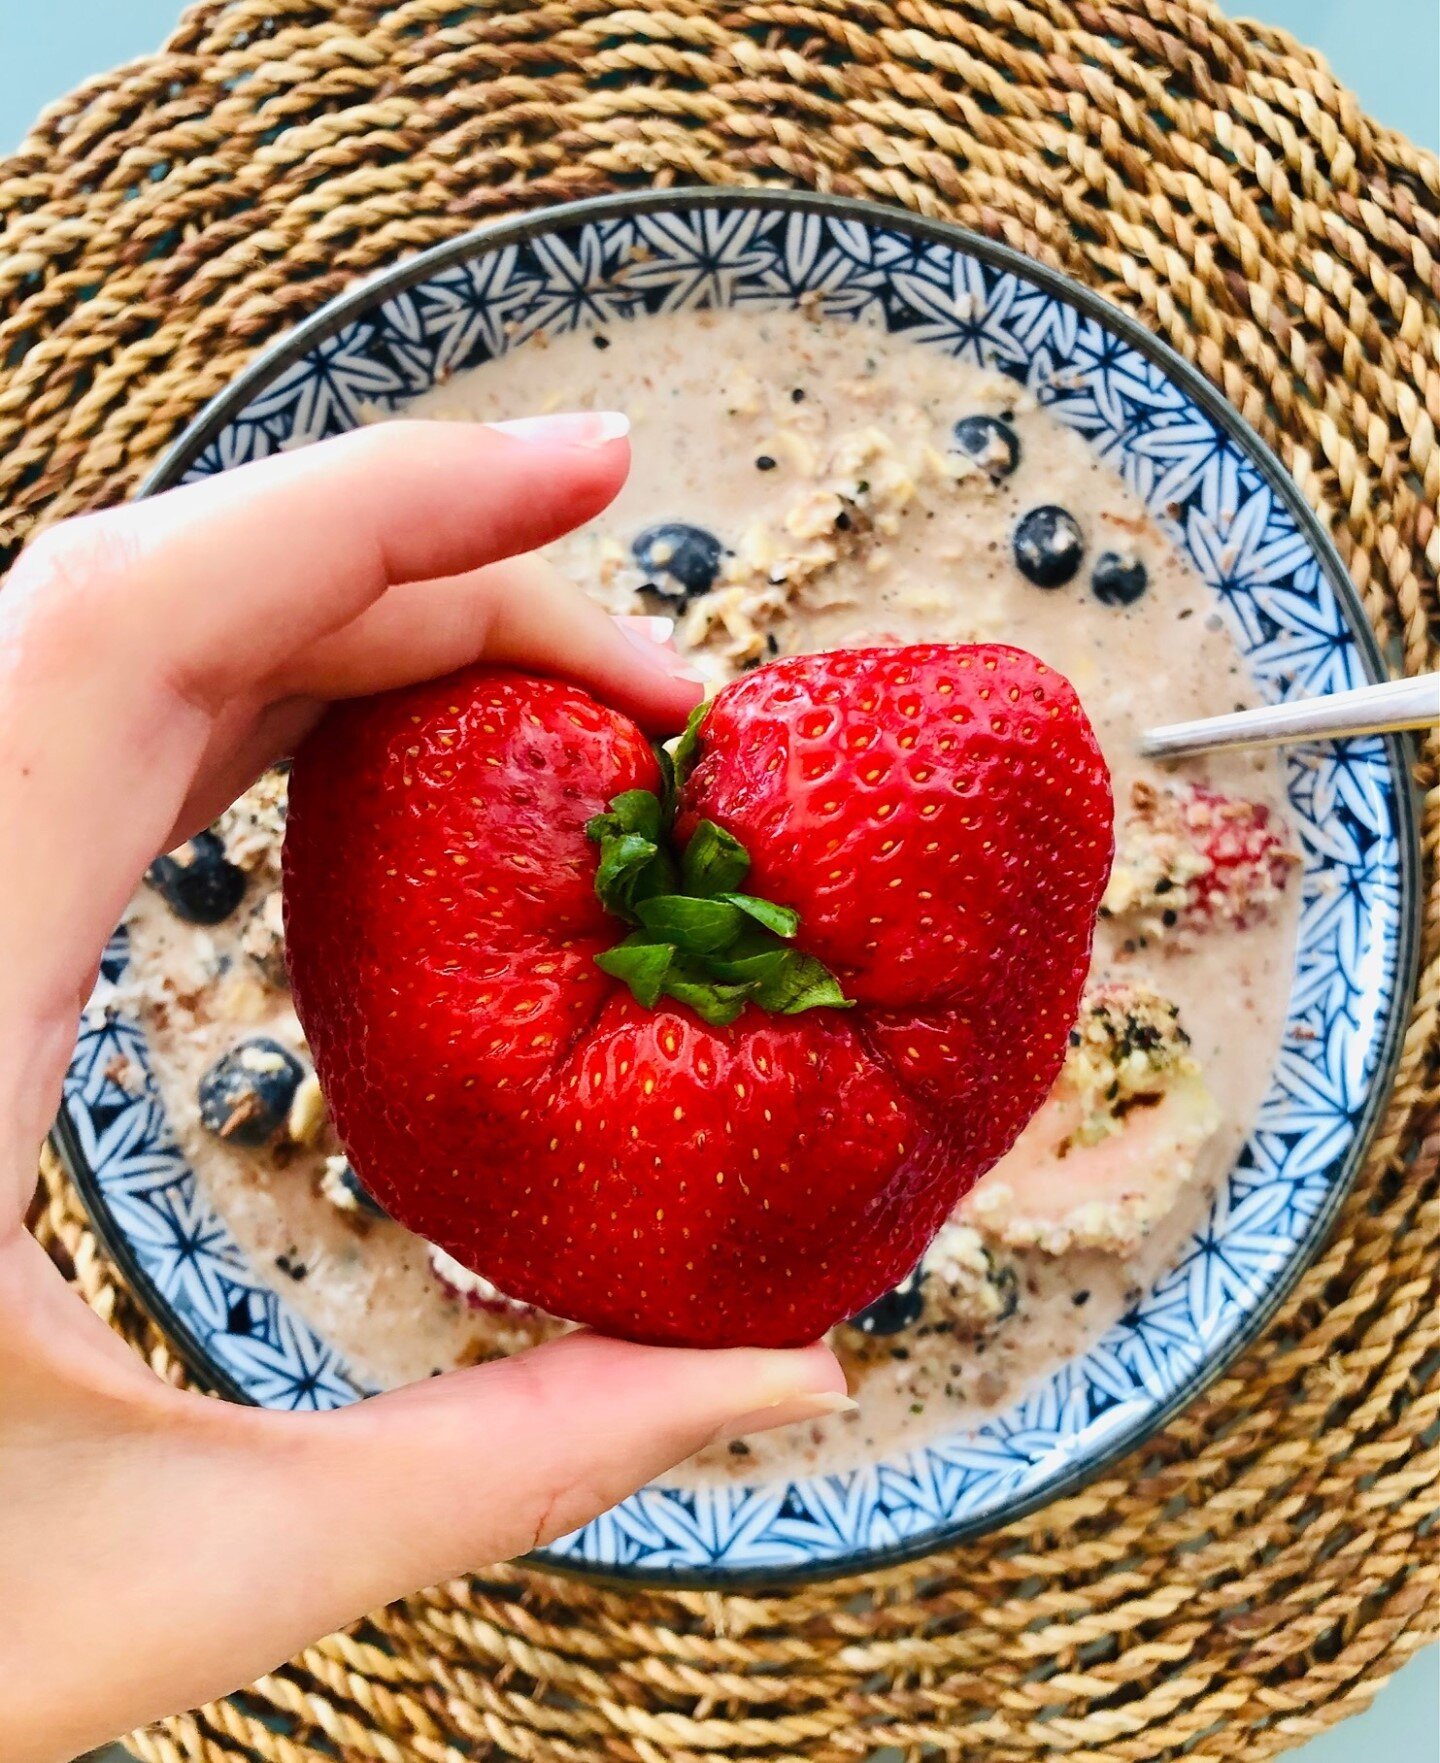 🍓 I recently found a big, juicy heart-shaped strawberry in a box of strawberries as I was making breakfast. I LOVE strawberries and instantly was filled with excitement over receiving this unexpected gift wrapped in red and green. As I held the stra